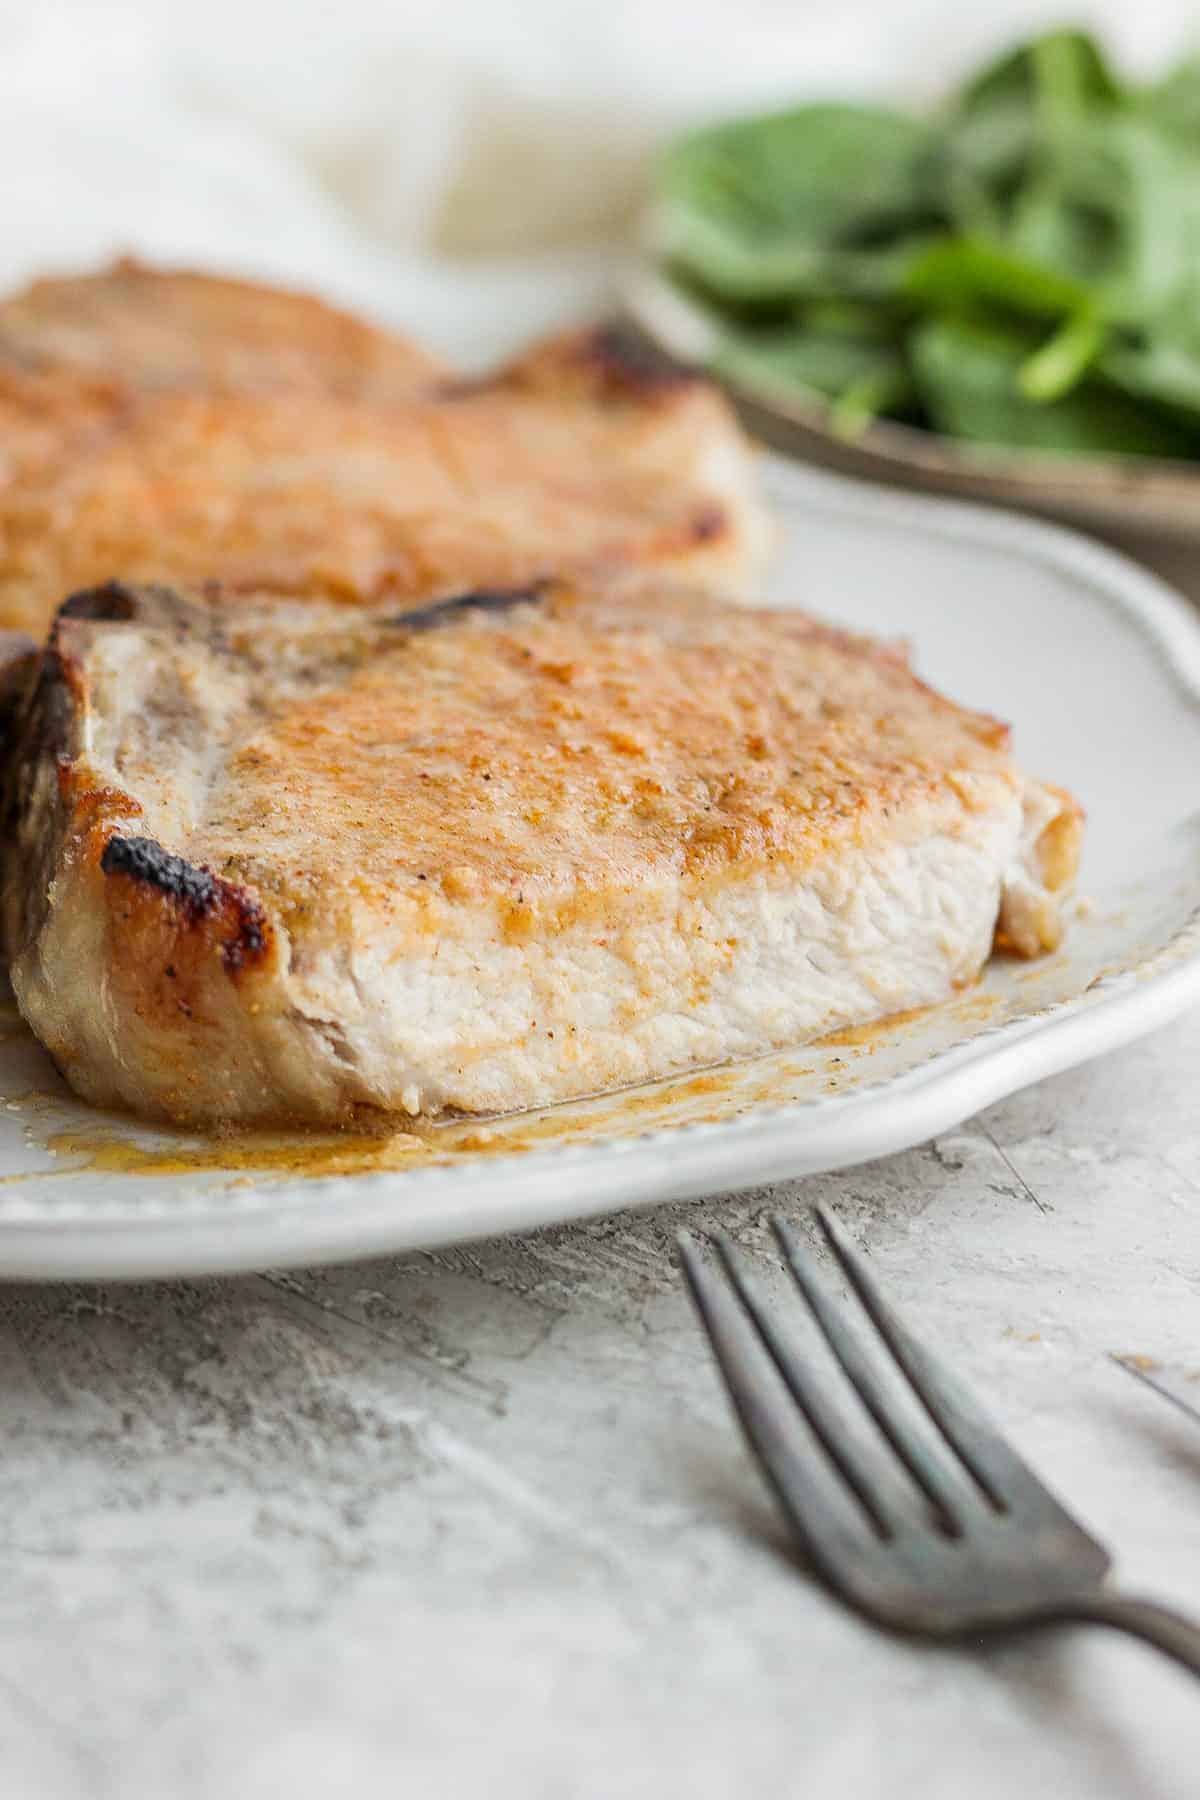 Ultimate Baked Pork Chops Recipe - Fit Foodie Finds